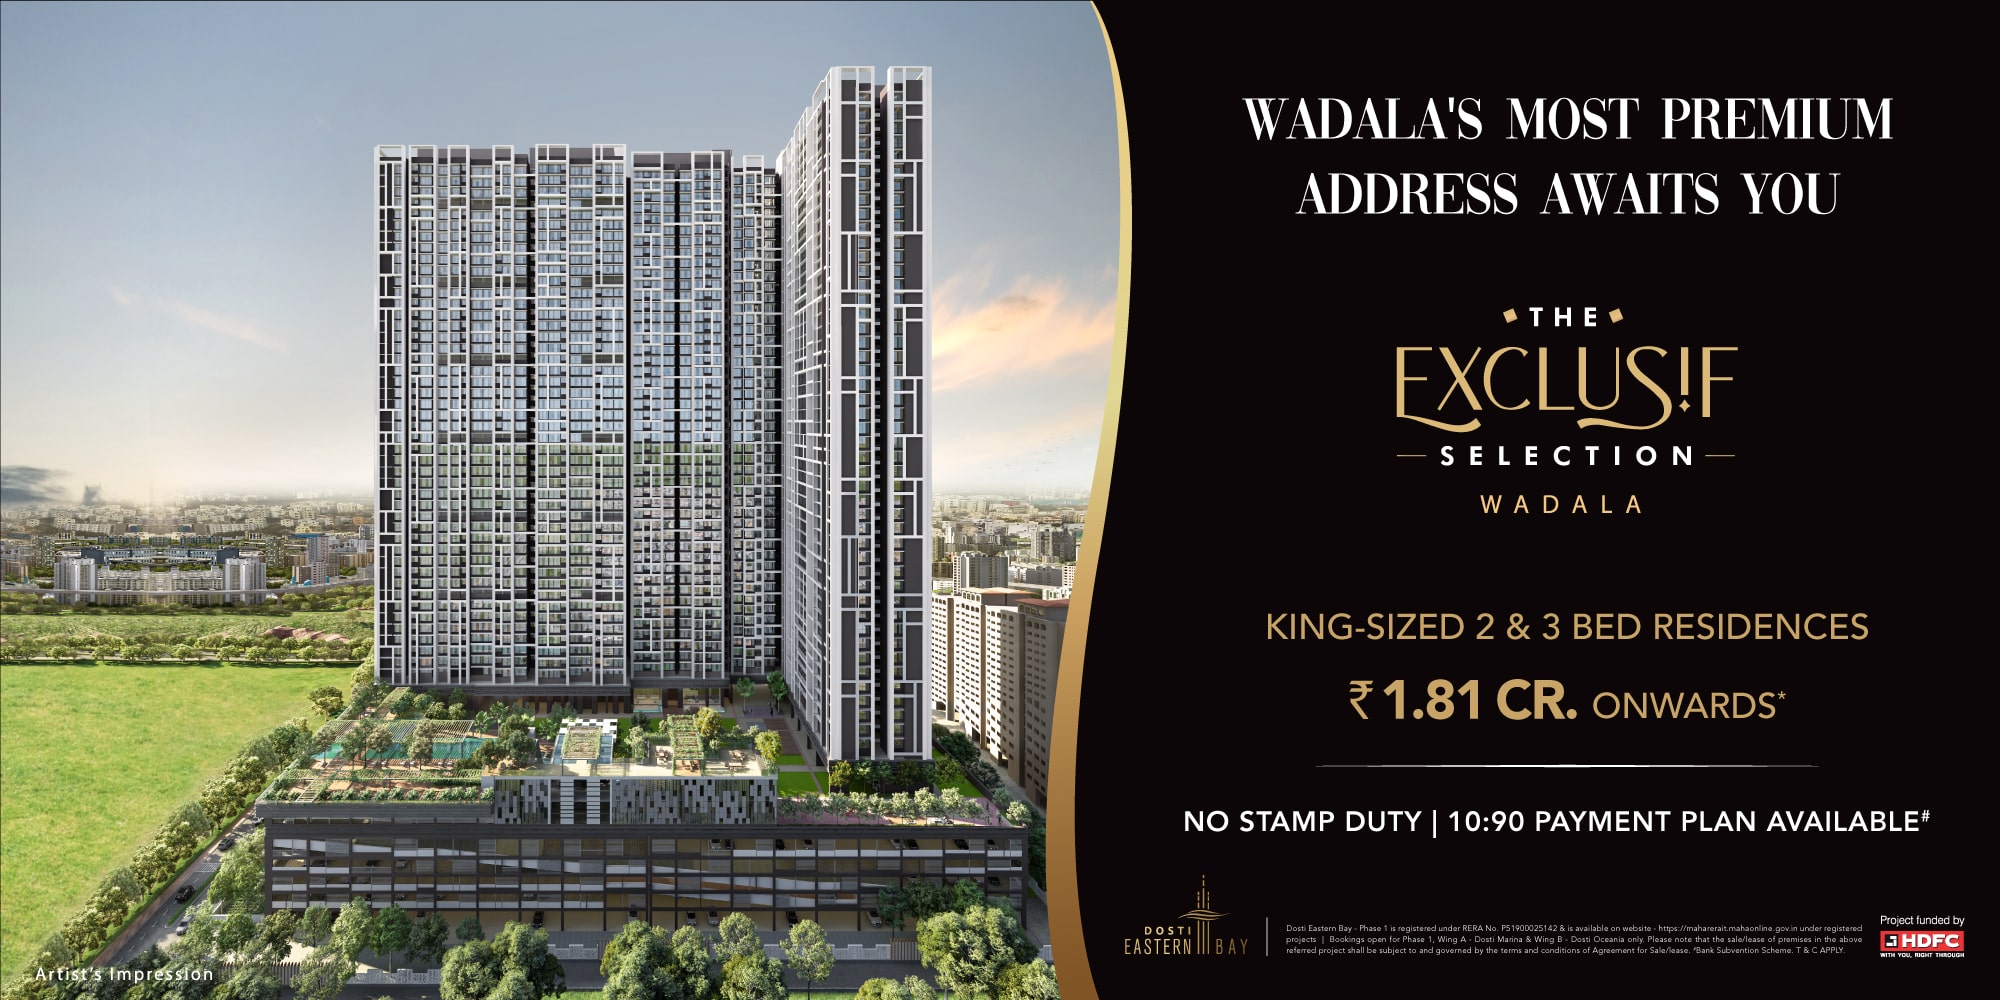 No stamp duty, 10:90 payment plan available at Dosti Eastern Bay, Mumbai Update